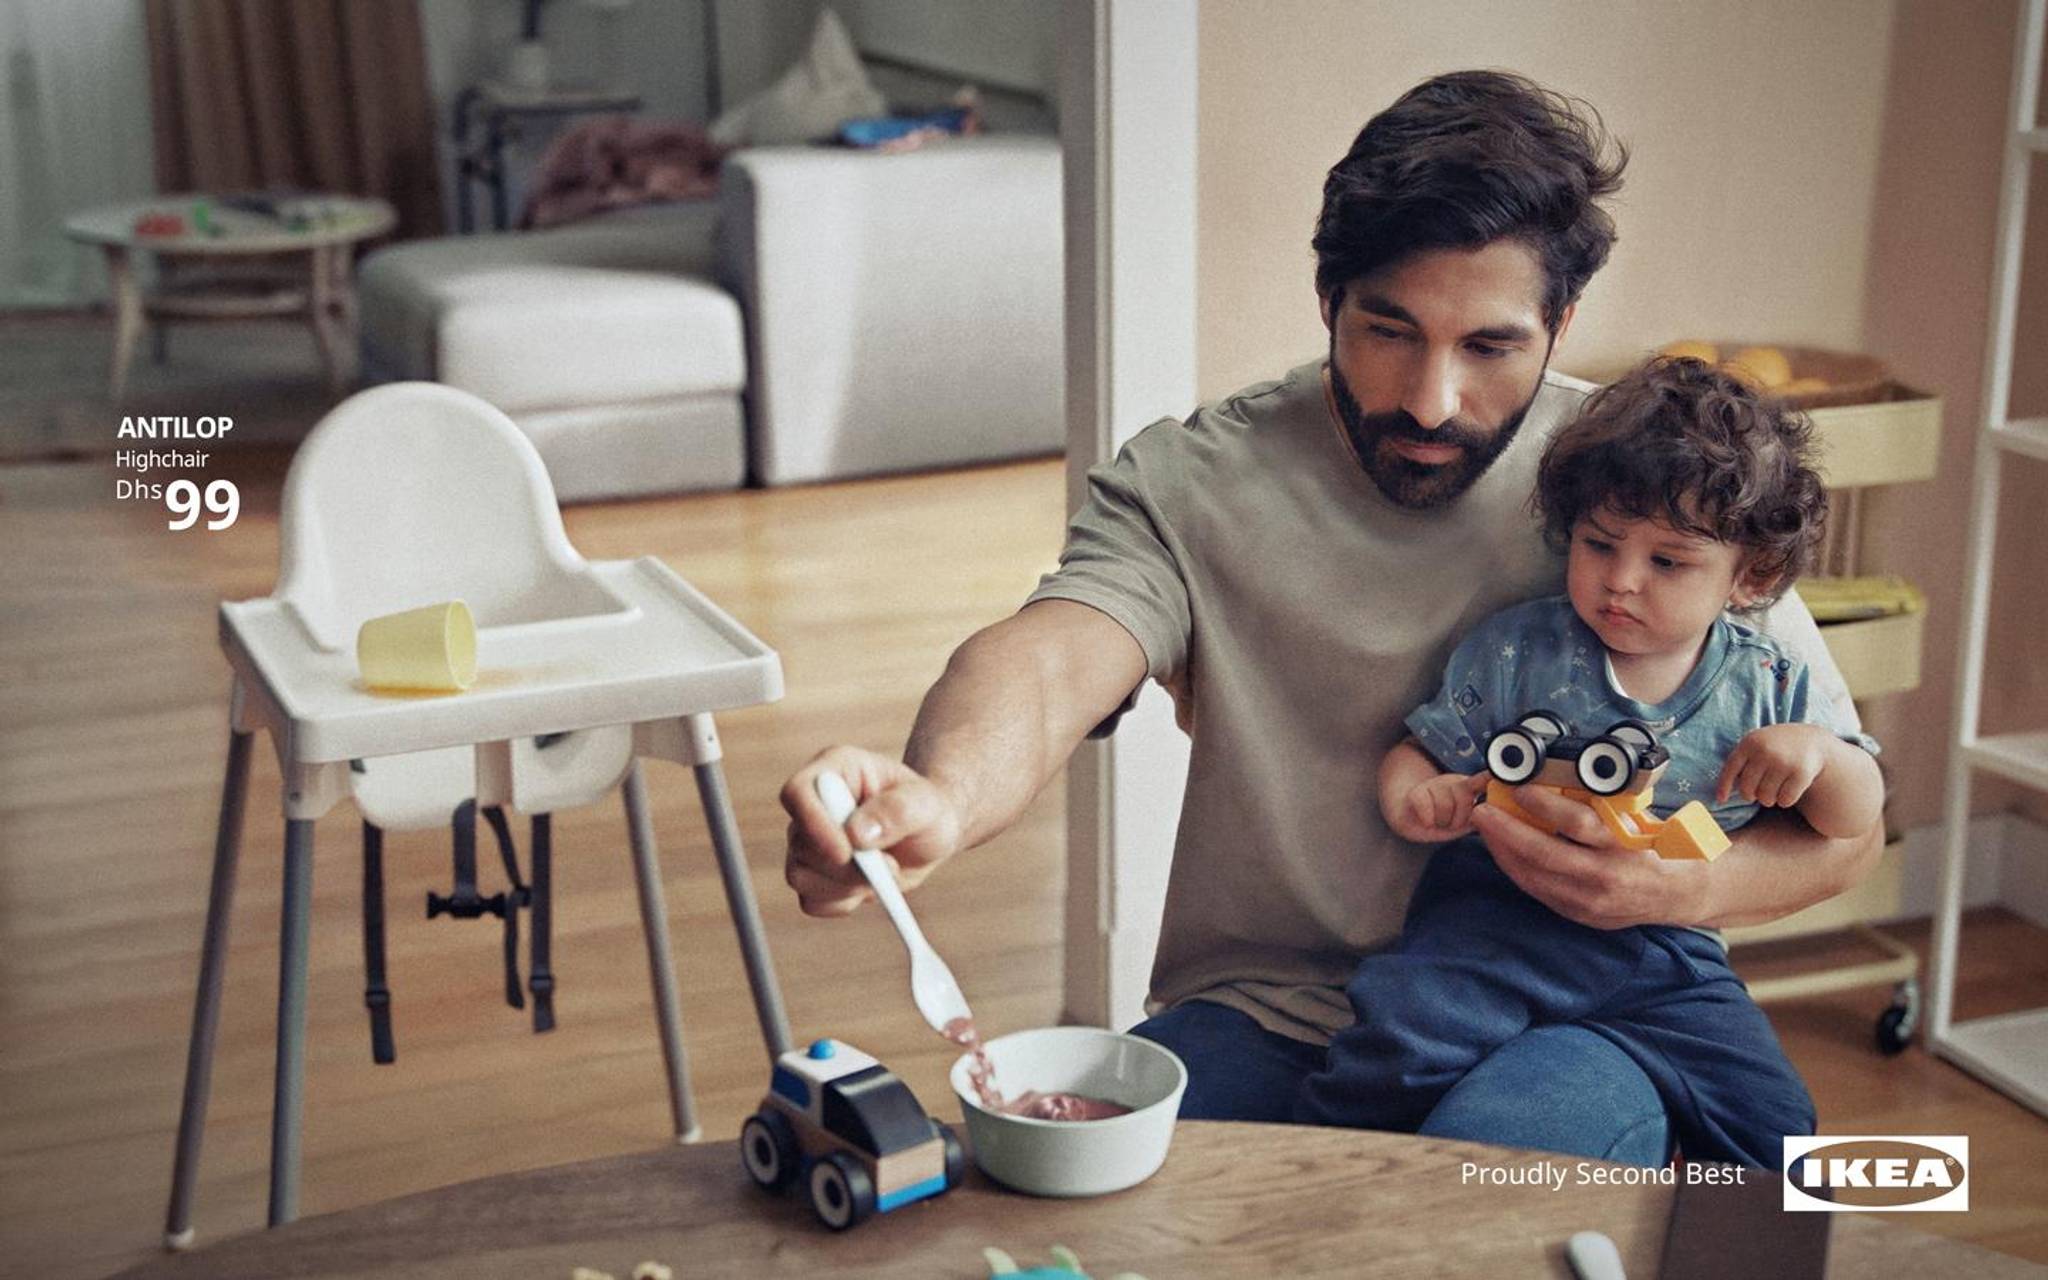 IKEA takes the backseat in parent-focused campaign